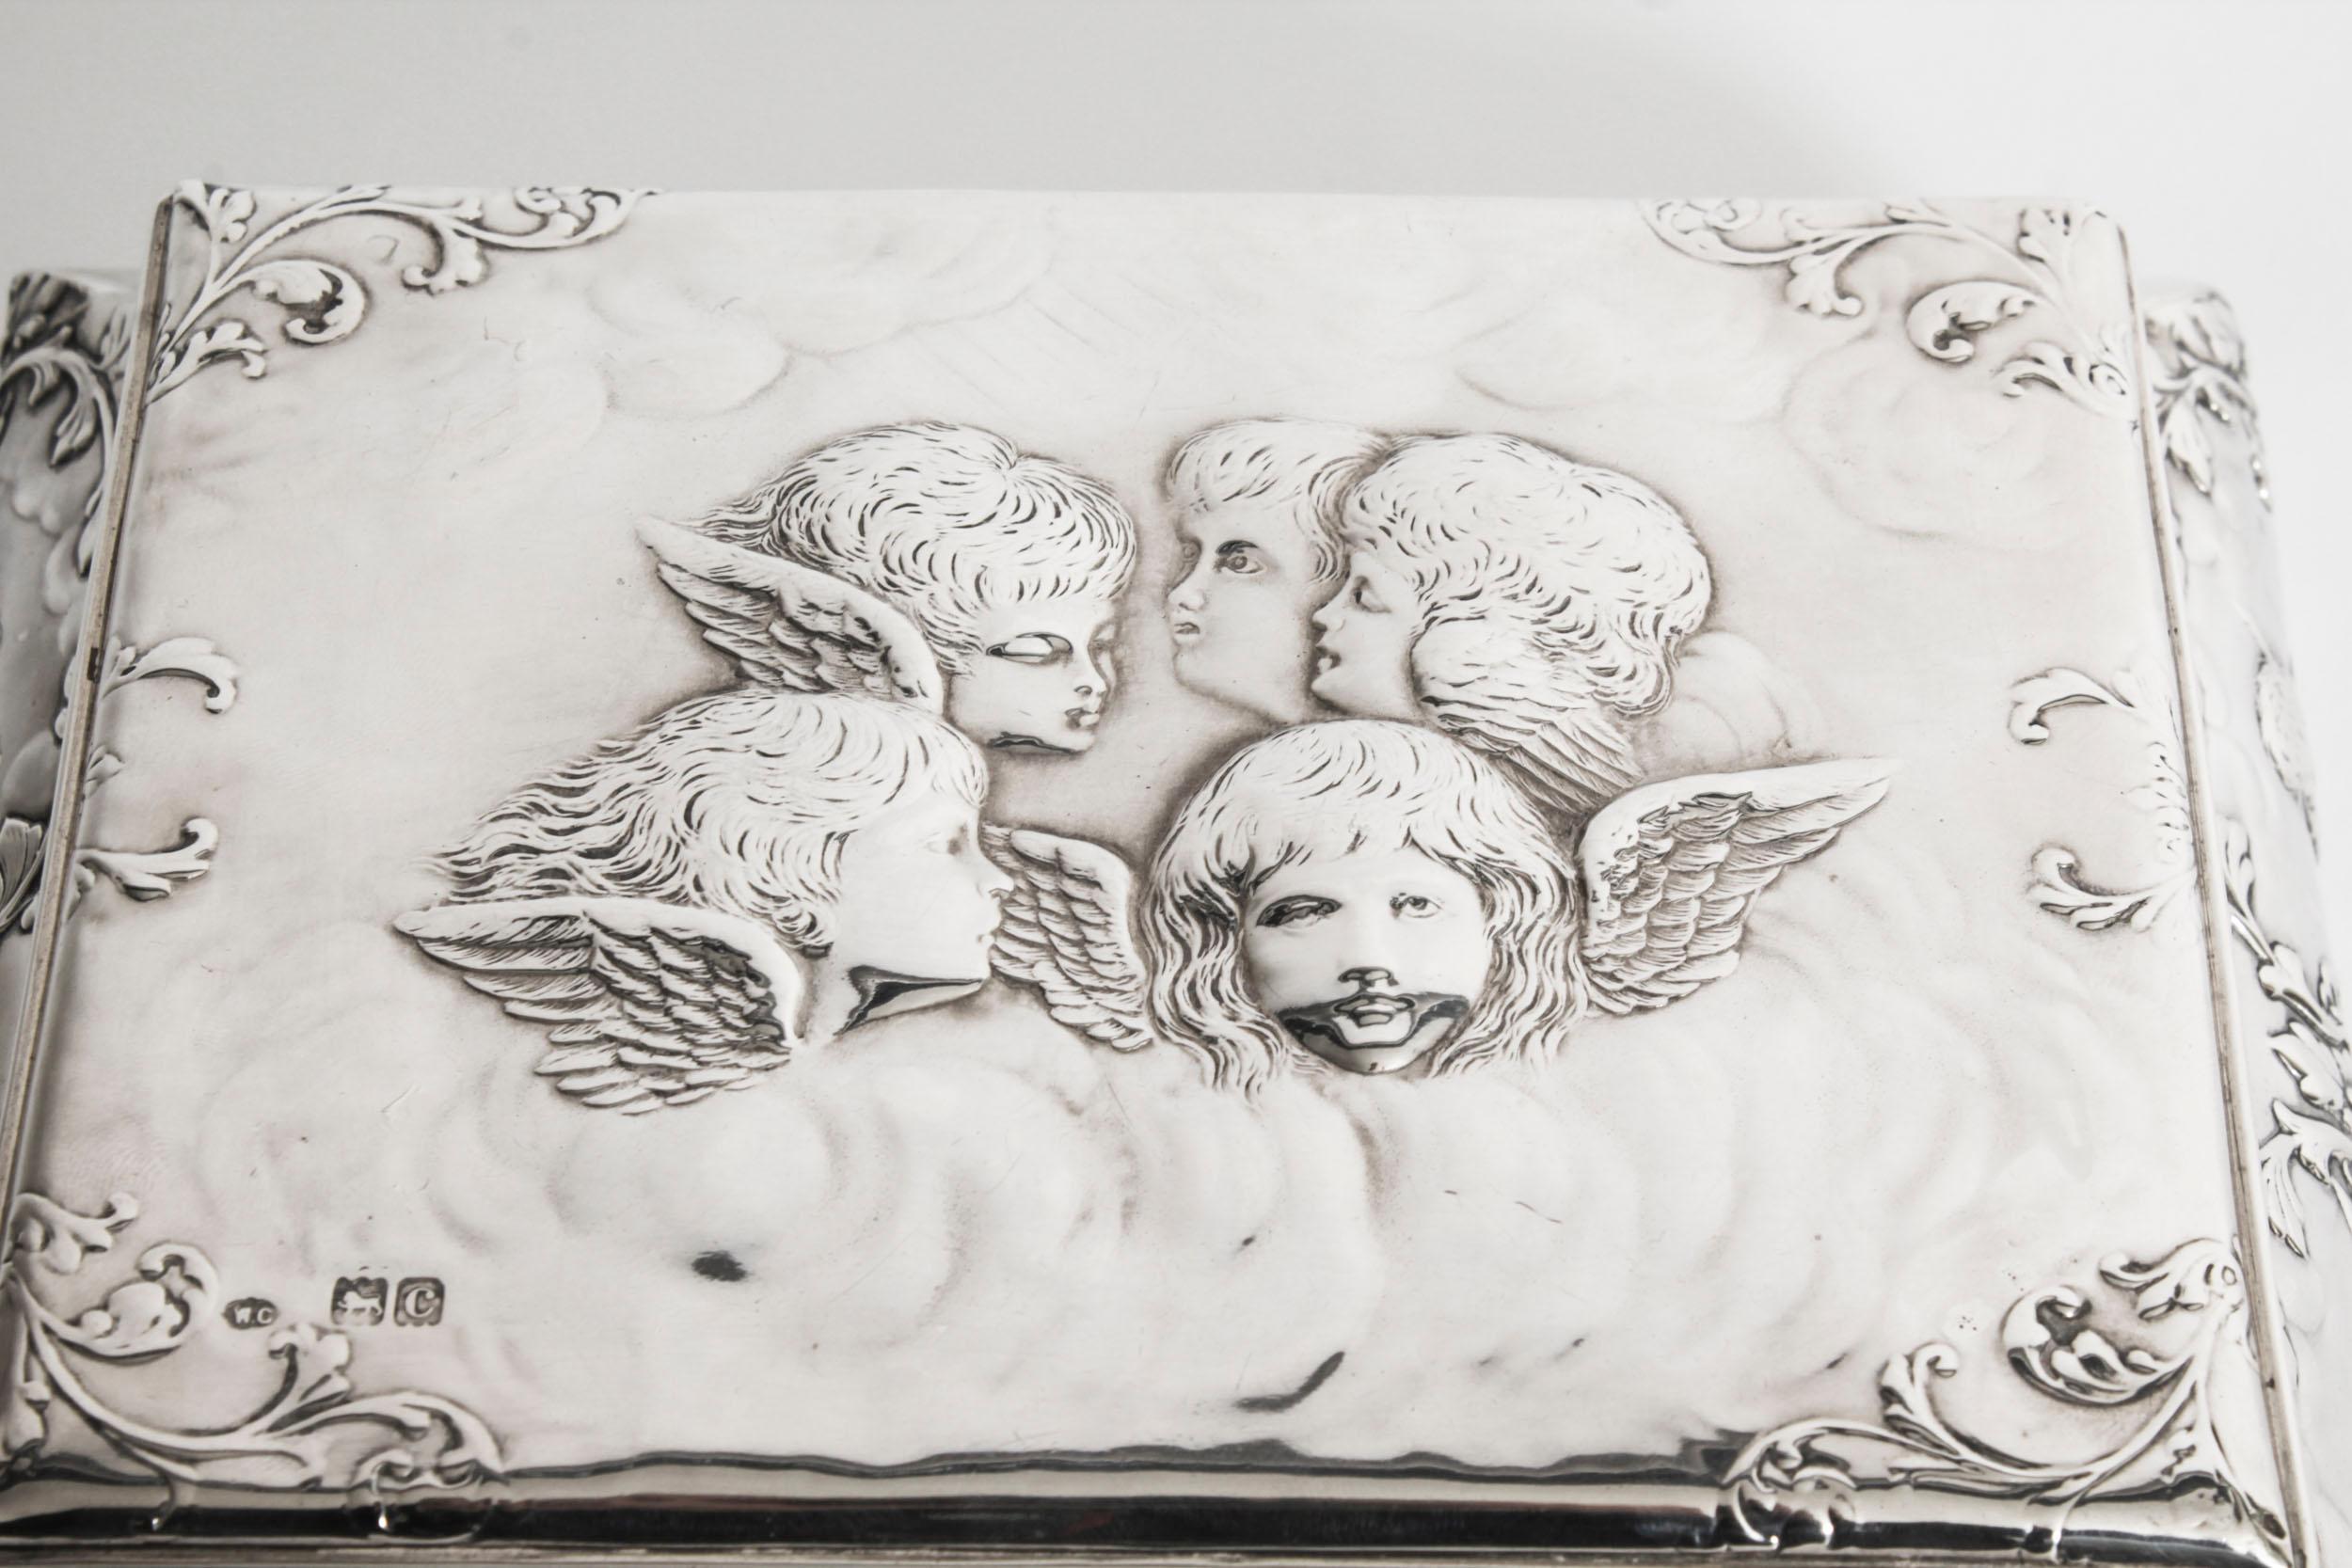 19th Century Antique Victorian Sterling Silver Casket by William Comyns & Sons 1898 For Sale